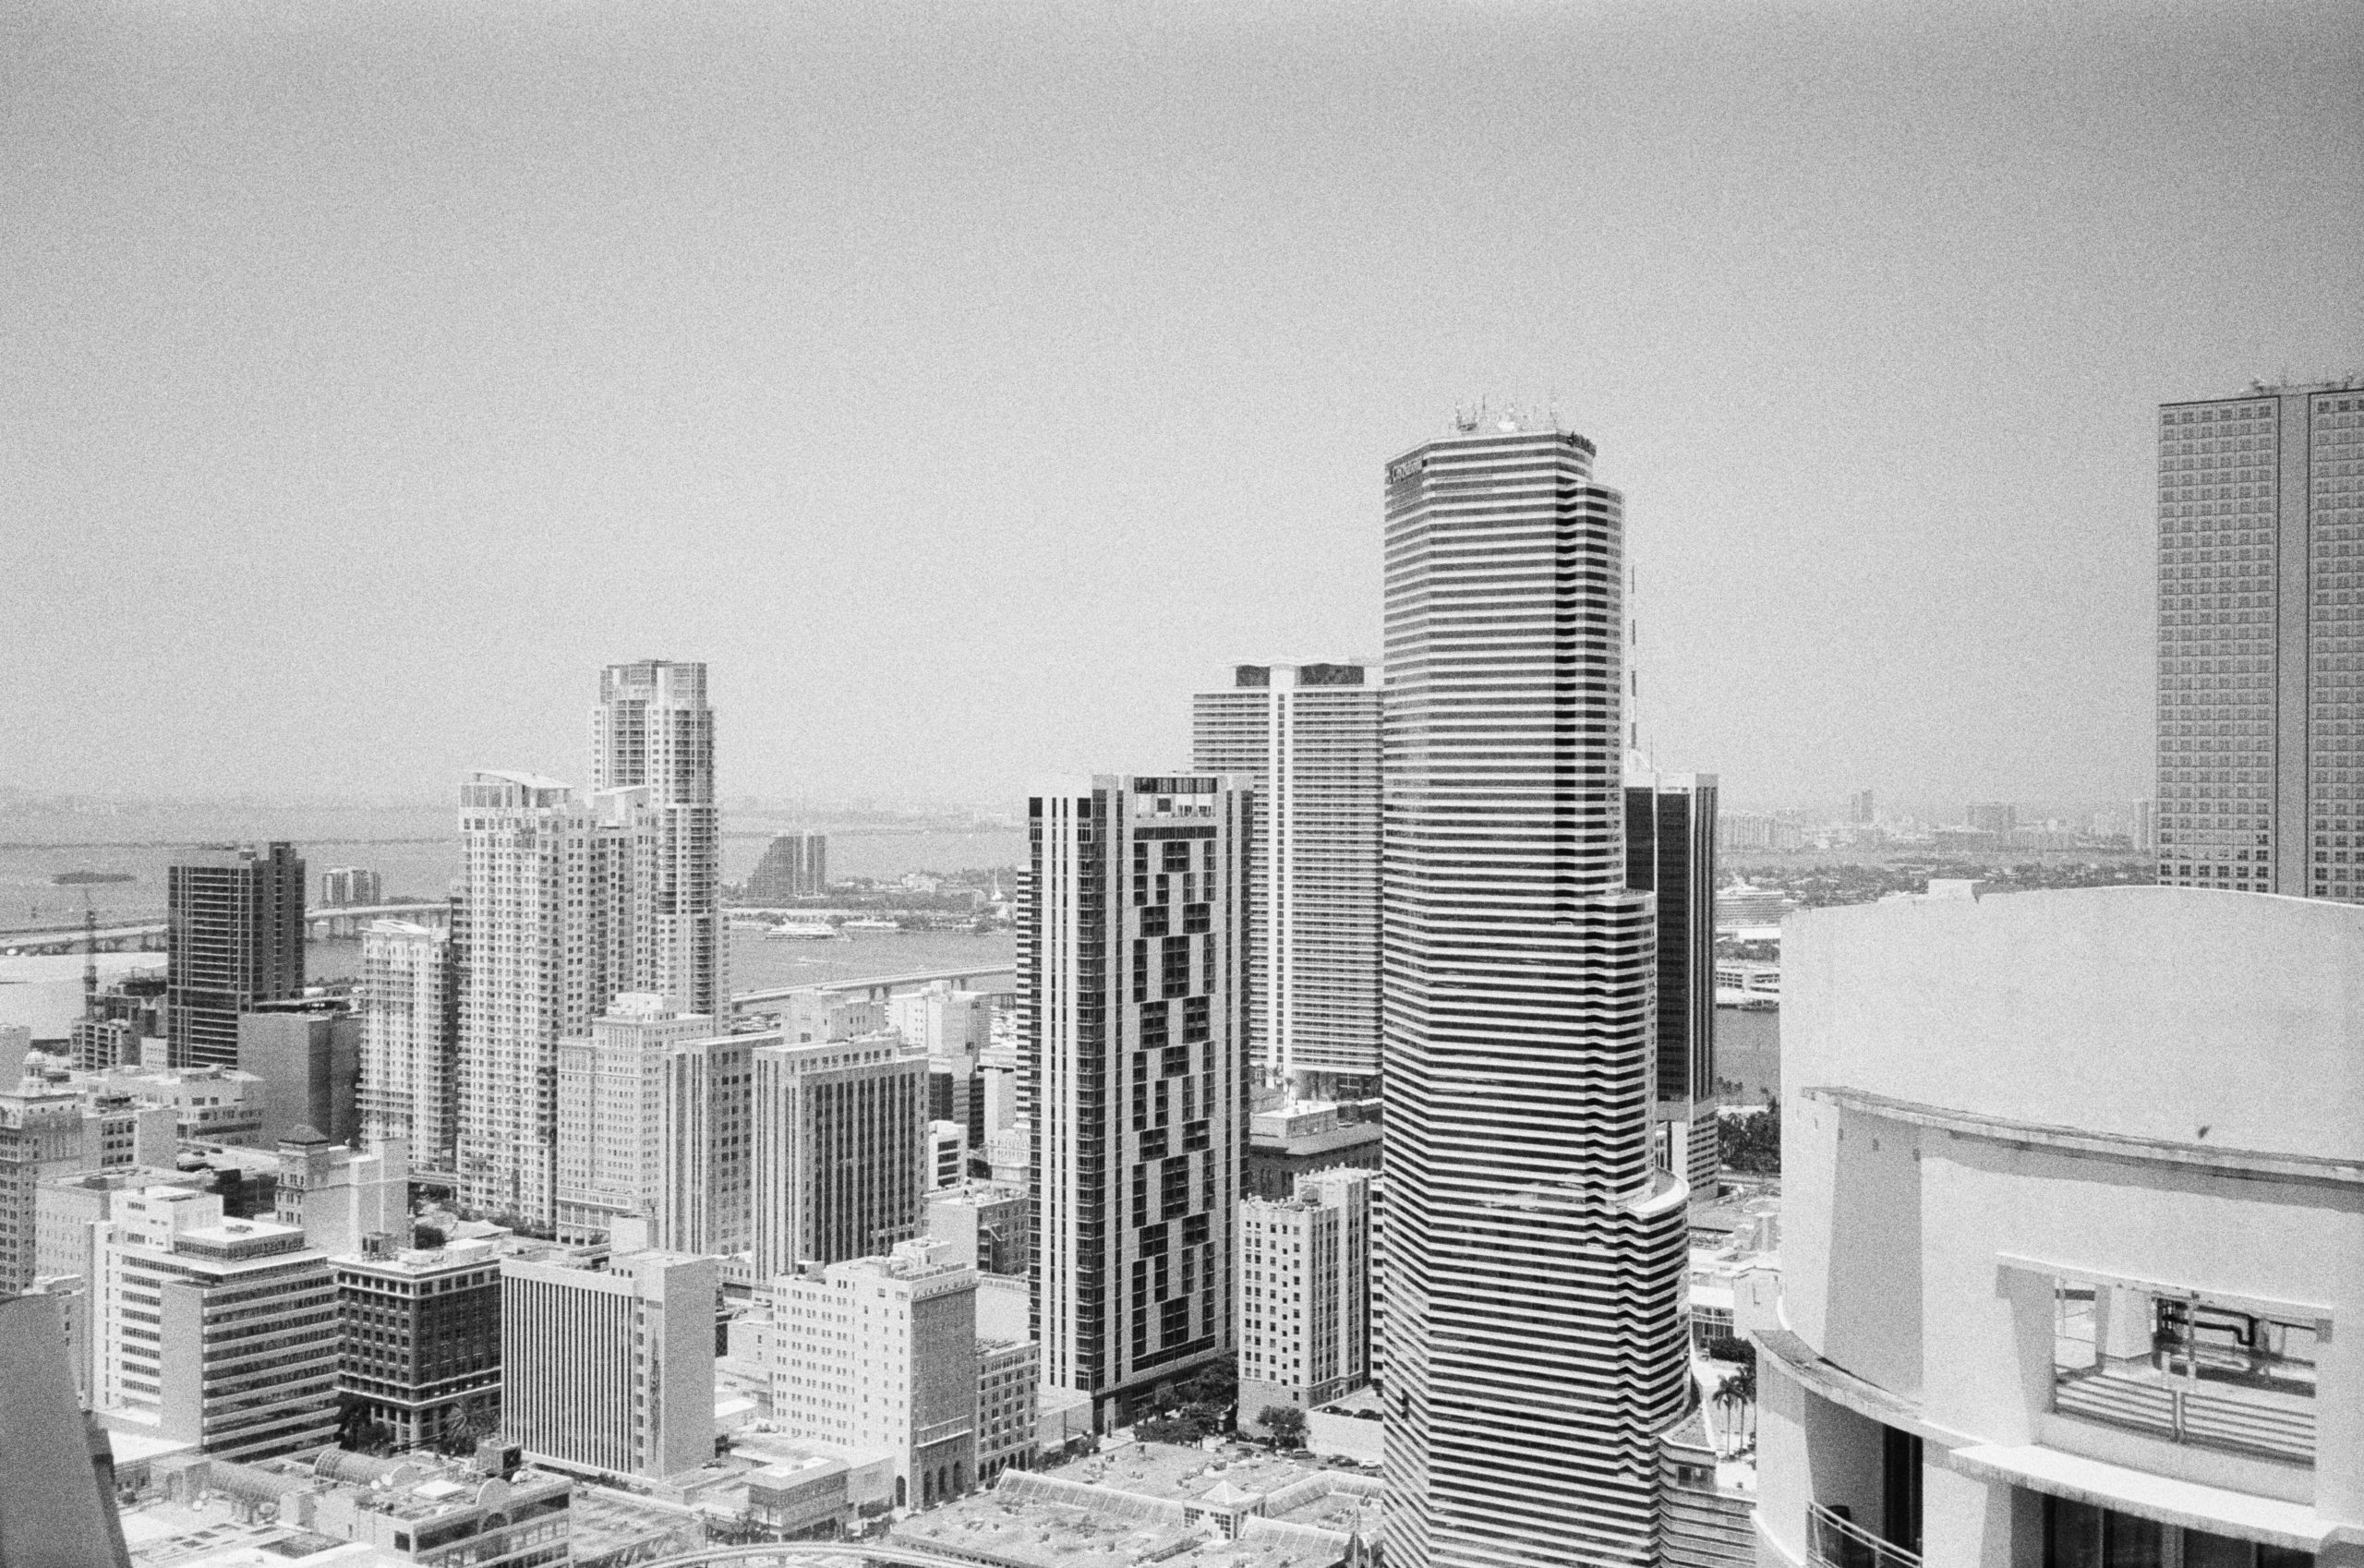 Black and white image of city with many buildings and skyscrapers